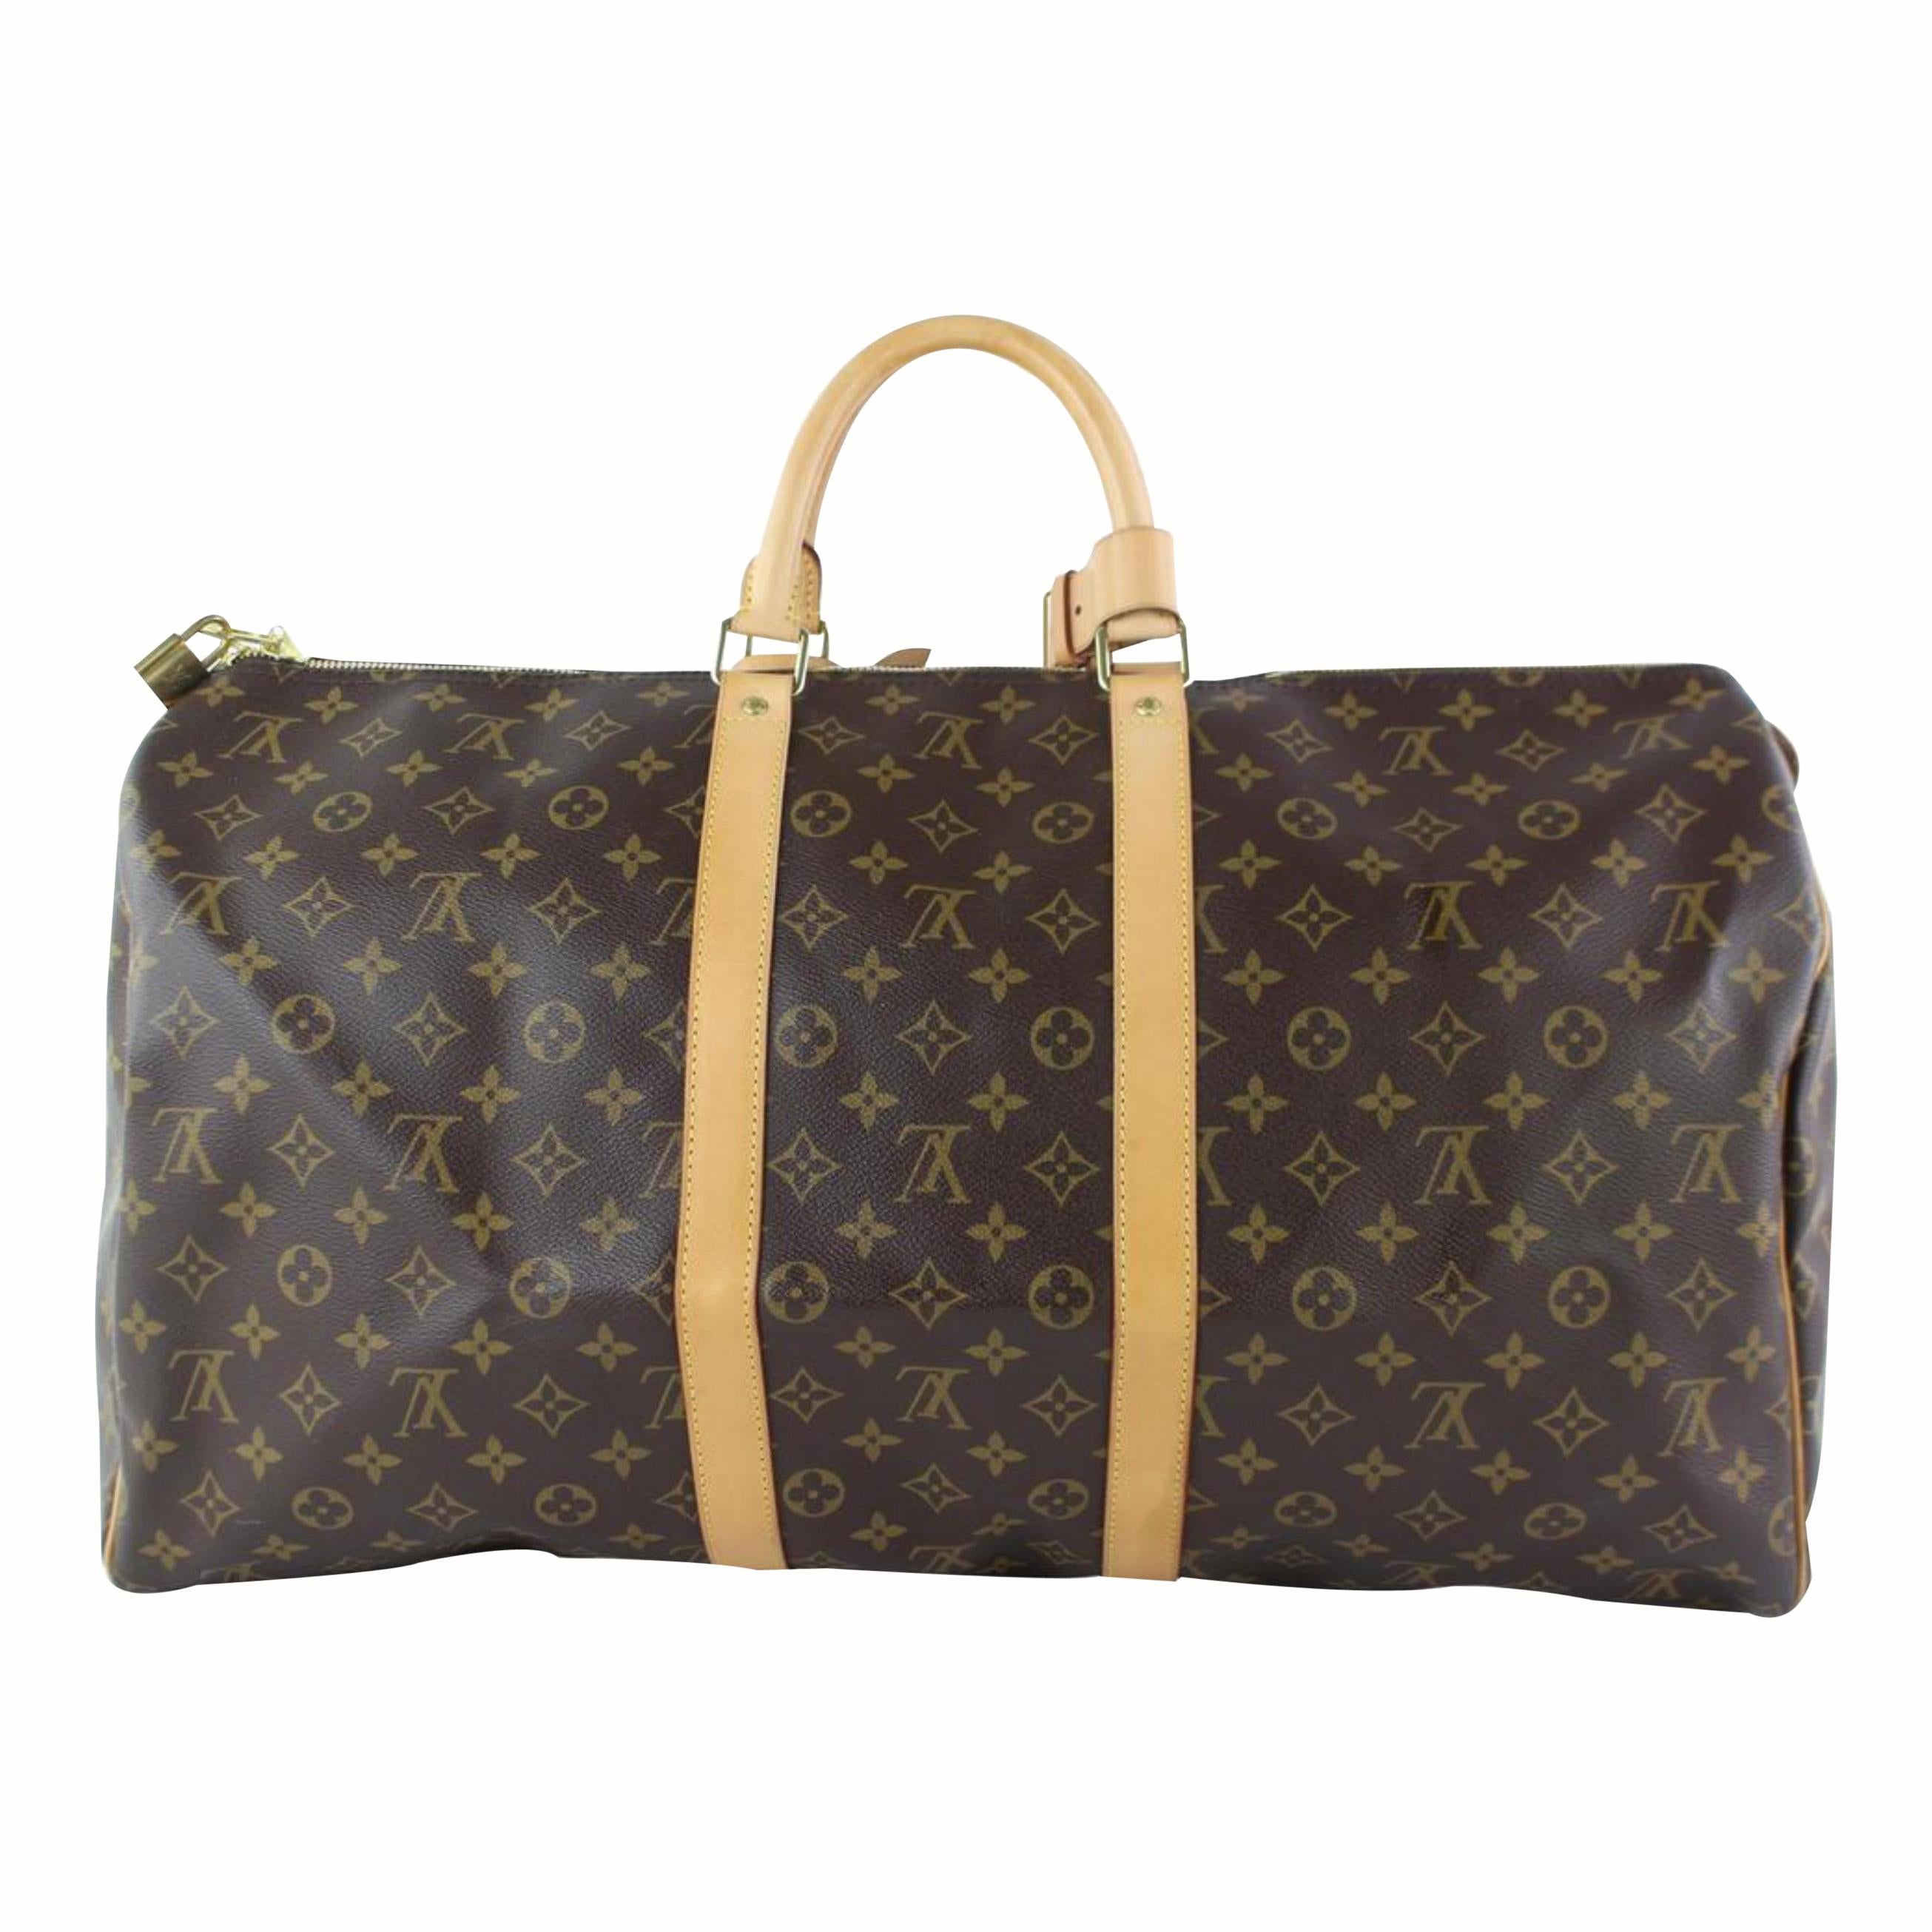 Louis Vuitton Keepall Monogram 50 2lz0928 Brown Coated Canvas Weekend/Travel Bag For Sale